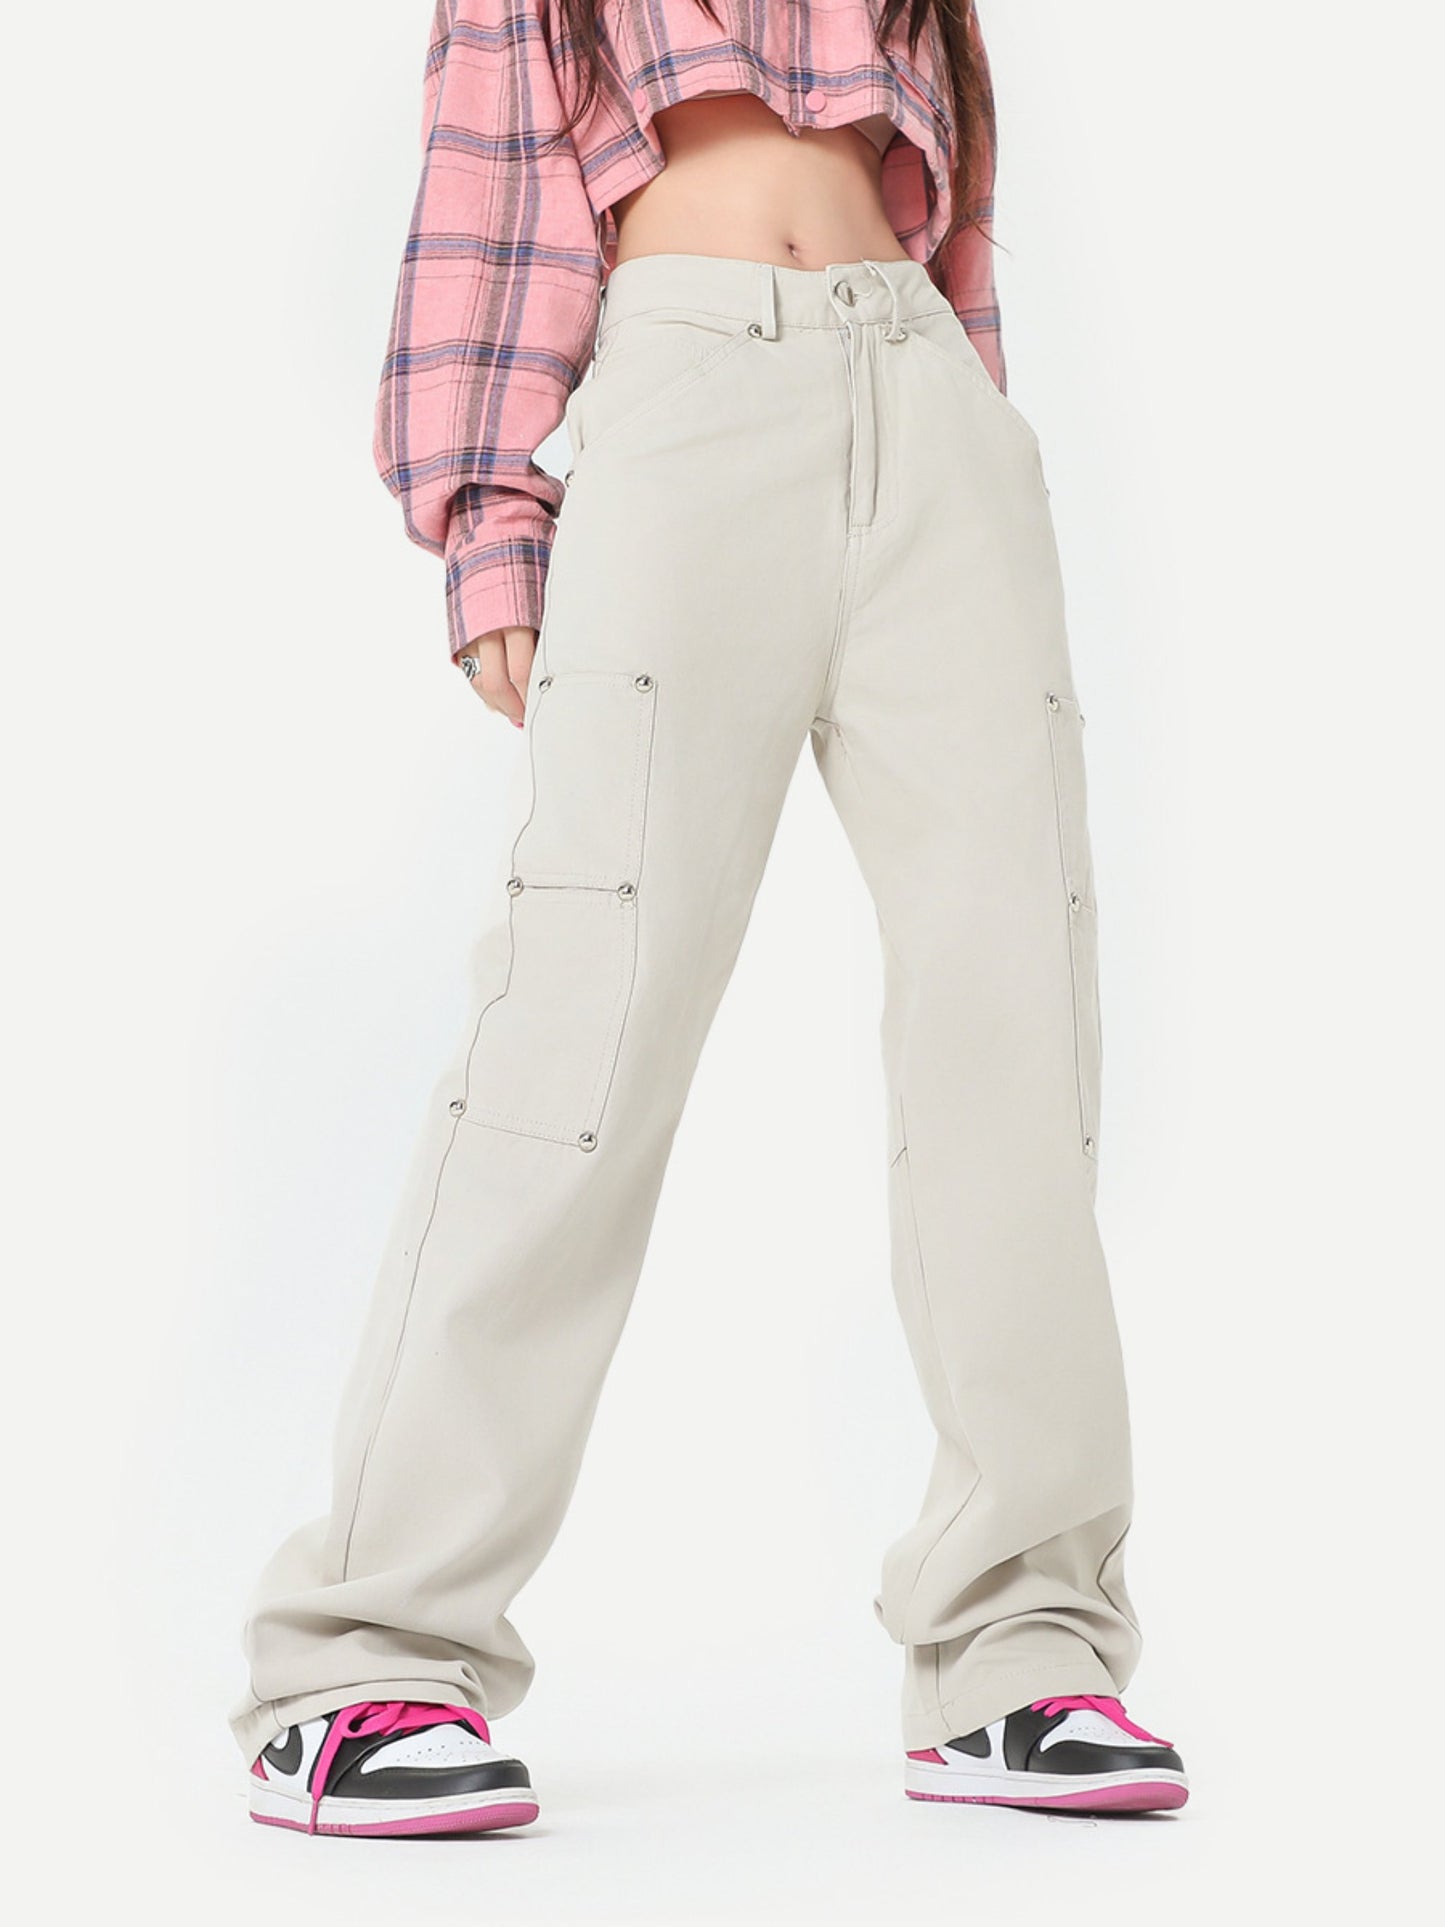 Unisex 3 Colors Studded High Street Style Casual Pants